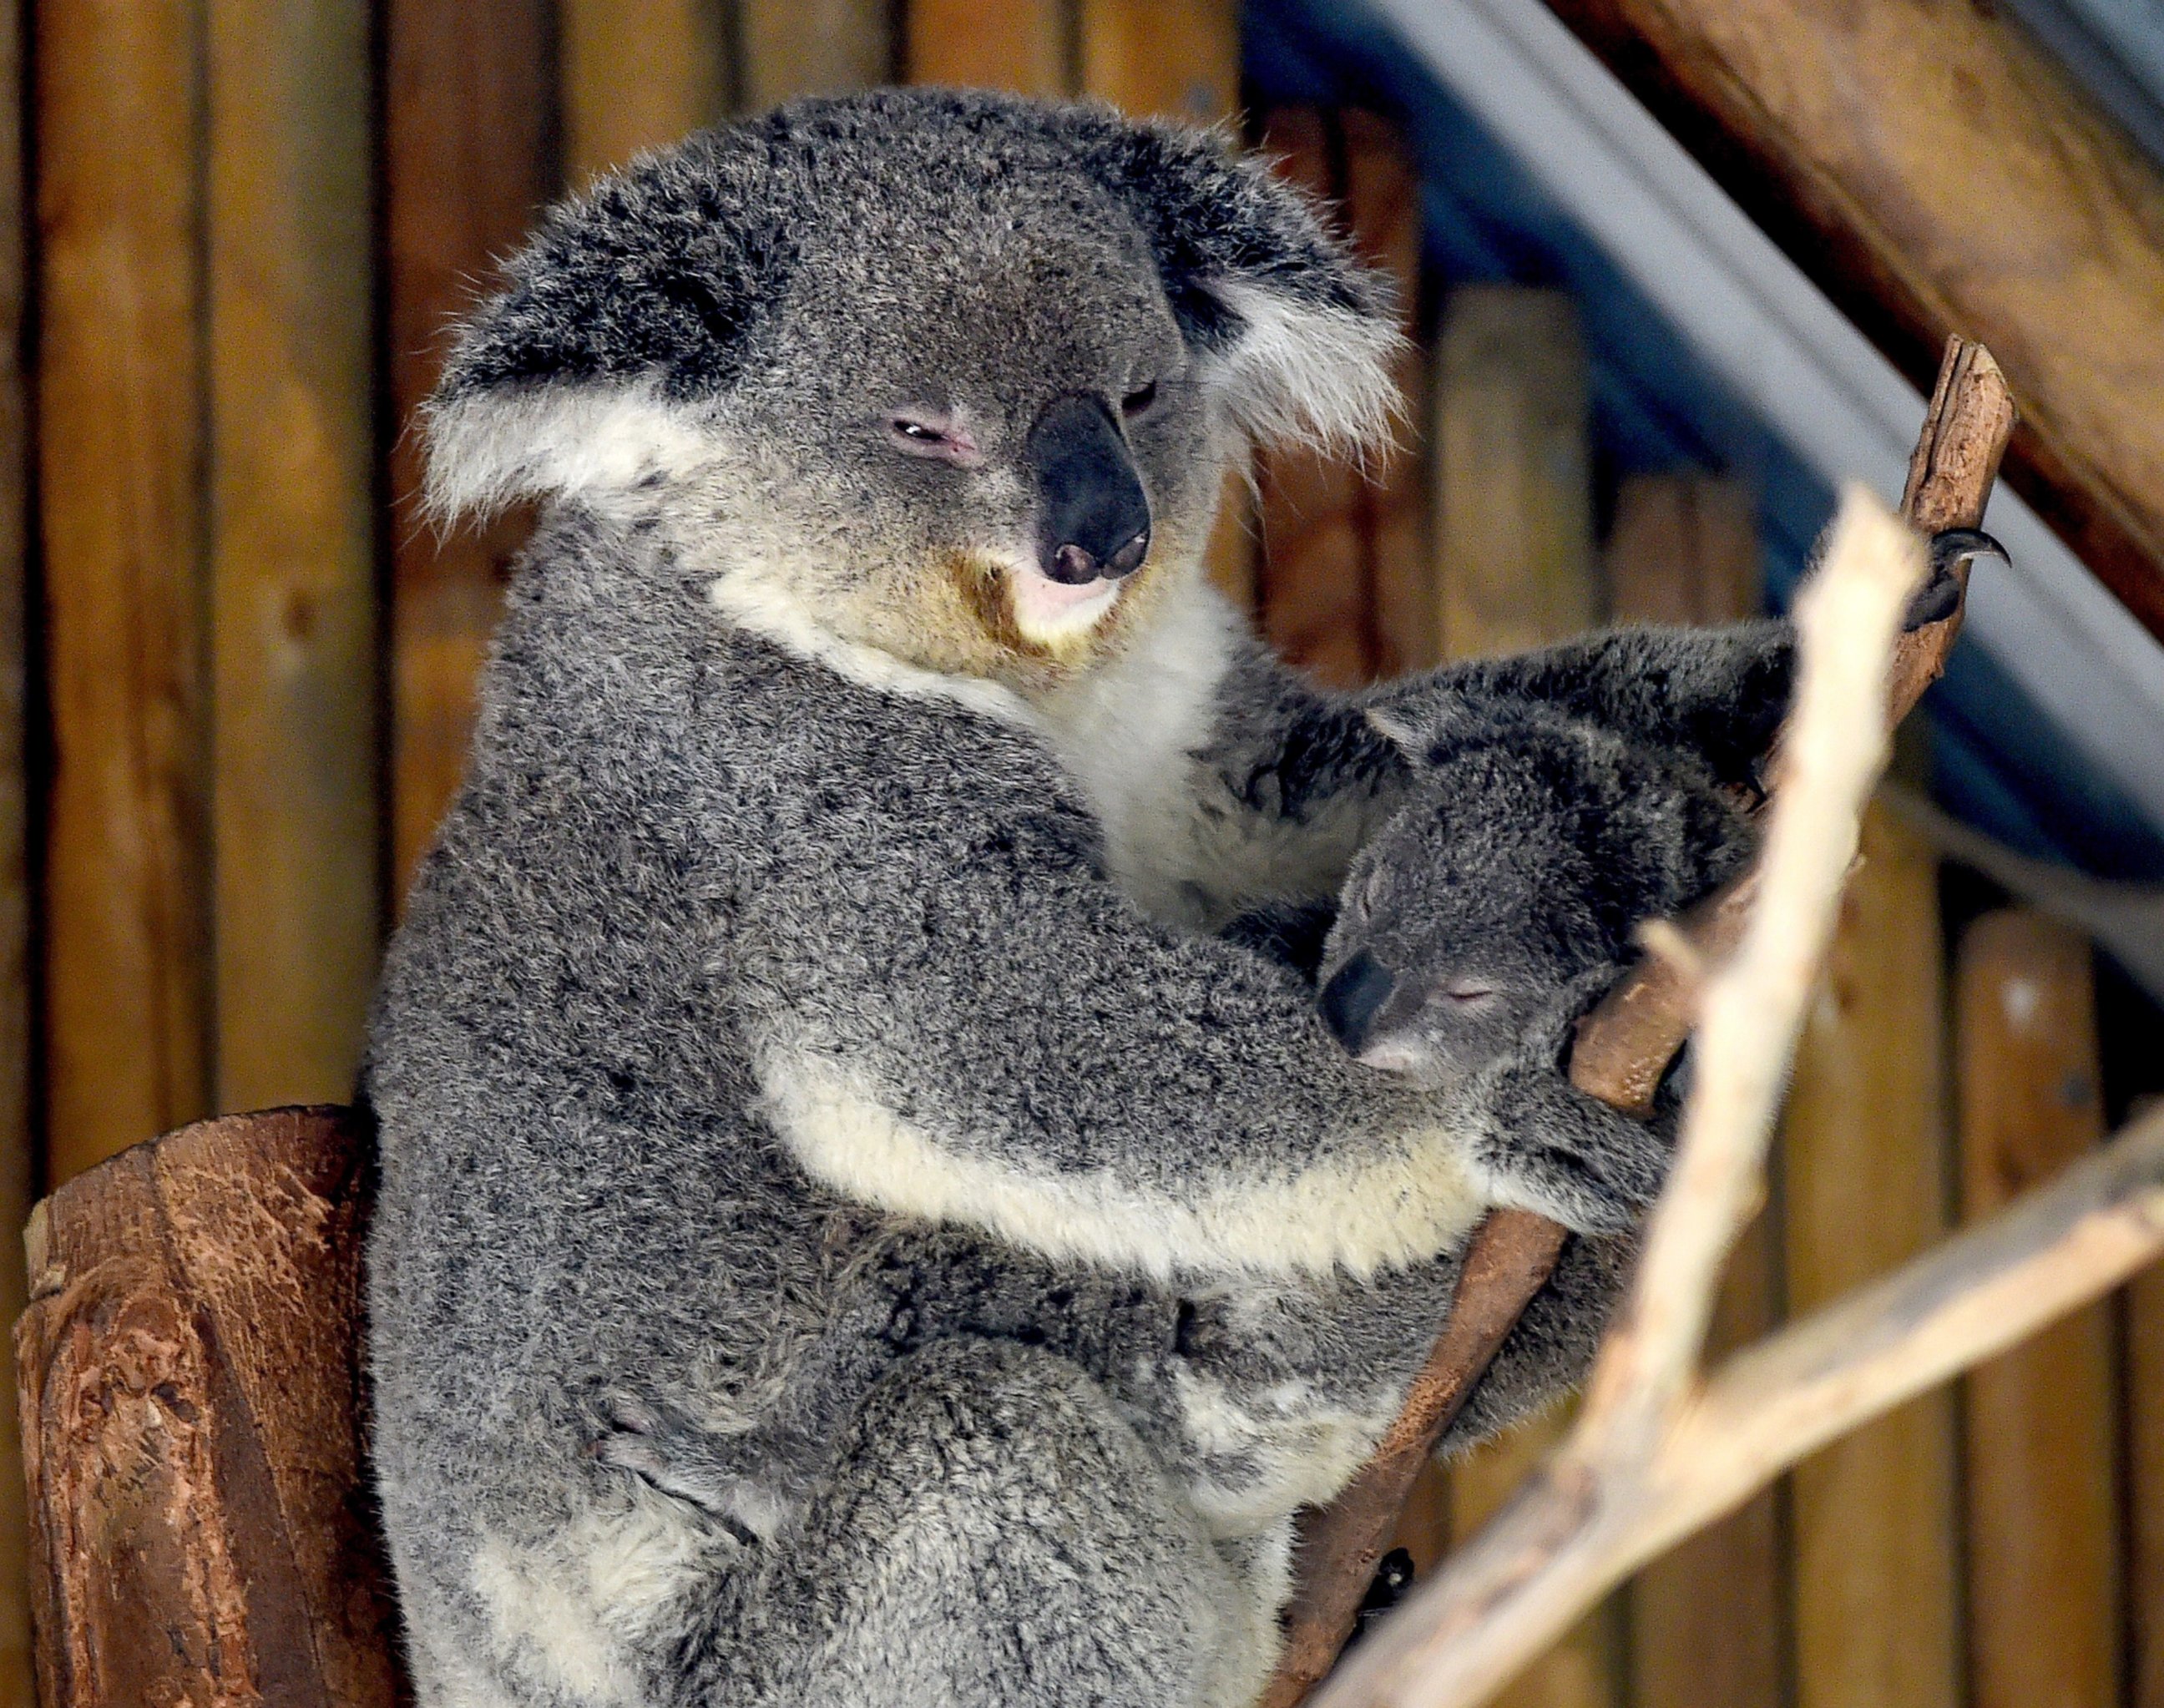 PHOTO: A mother Koala and her newly emerged unnamed Joey are pictured in the Australia section of the Los Angeles Zoo in Los Angeles, Calif. on March 12, 2015.